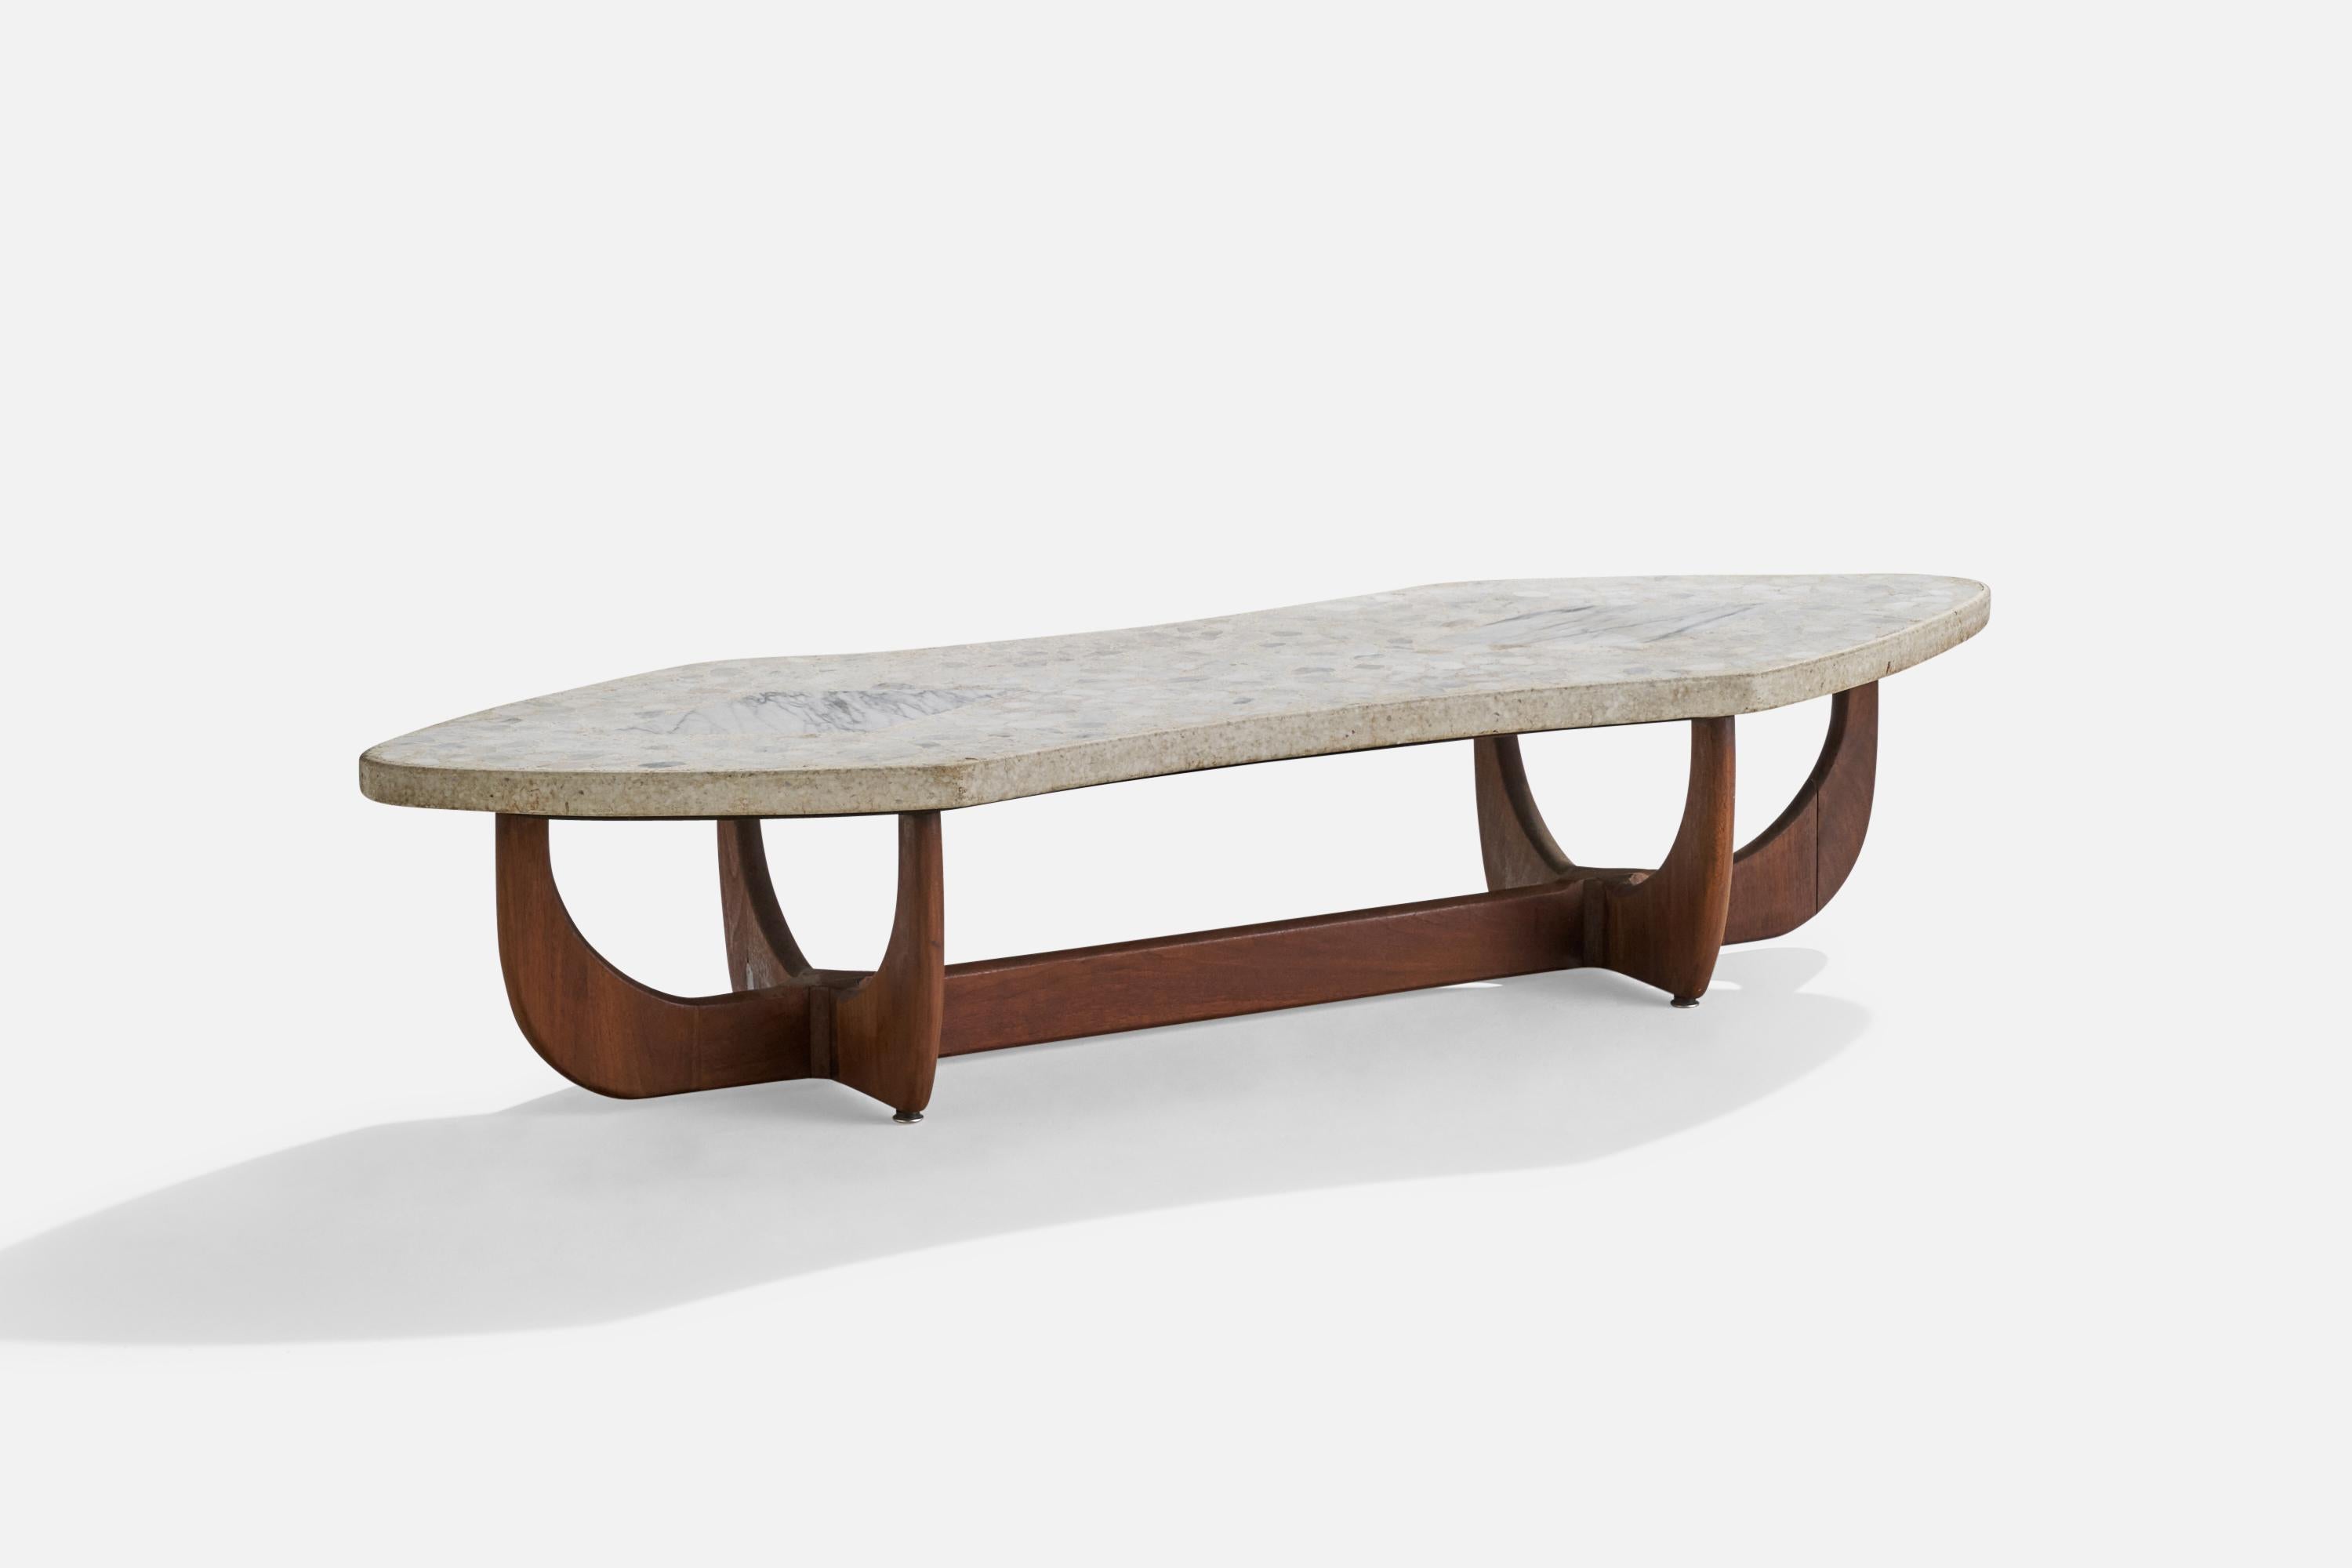 A walnut, terrazzo and carrara marble coffee table designed and produced in the US, c. 1950s.